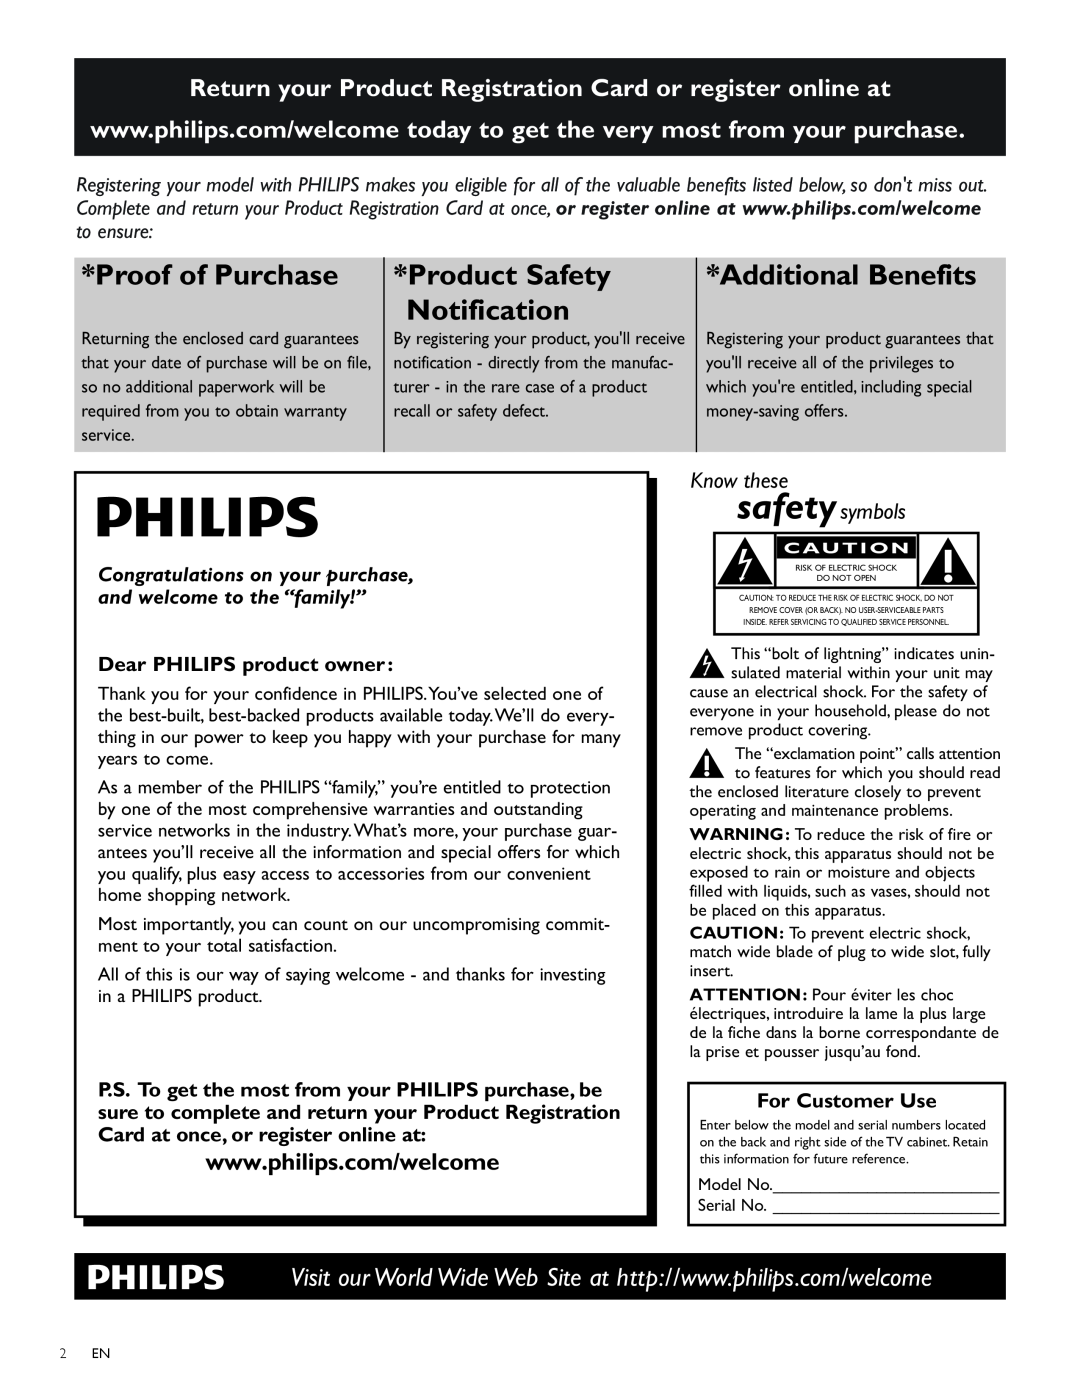 Philips 40PFL3705D Proof of Purchase, Product Safety, Additional Benefits, Notification, Dear PHILIPS product owner 